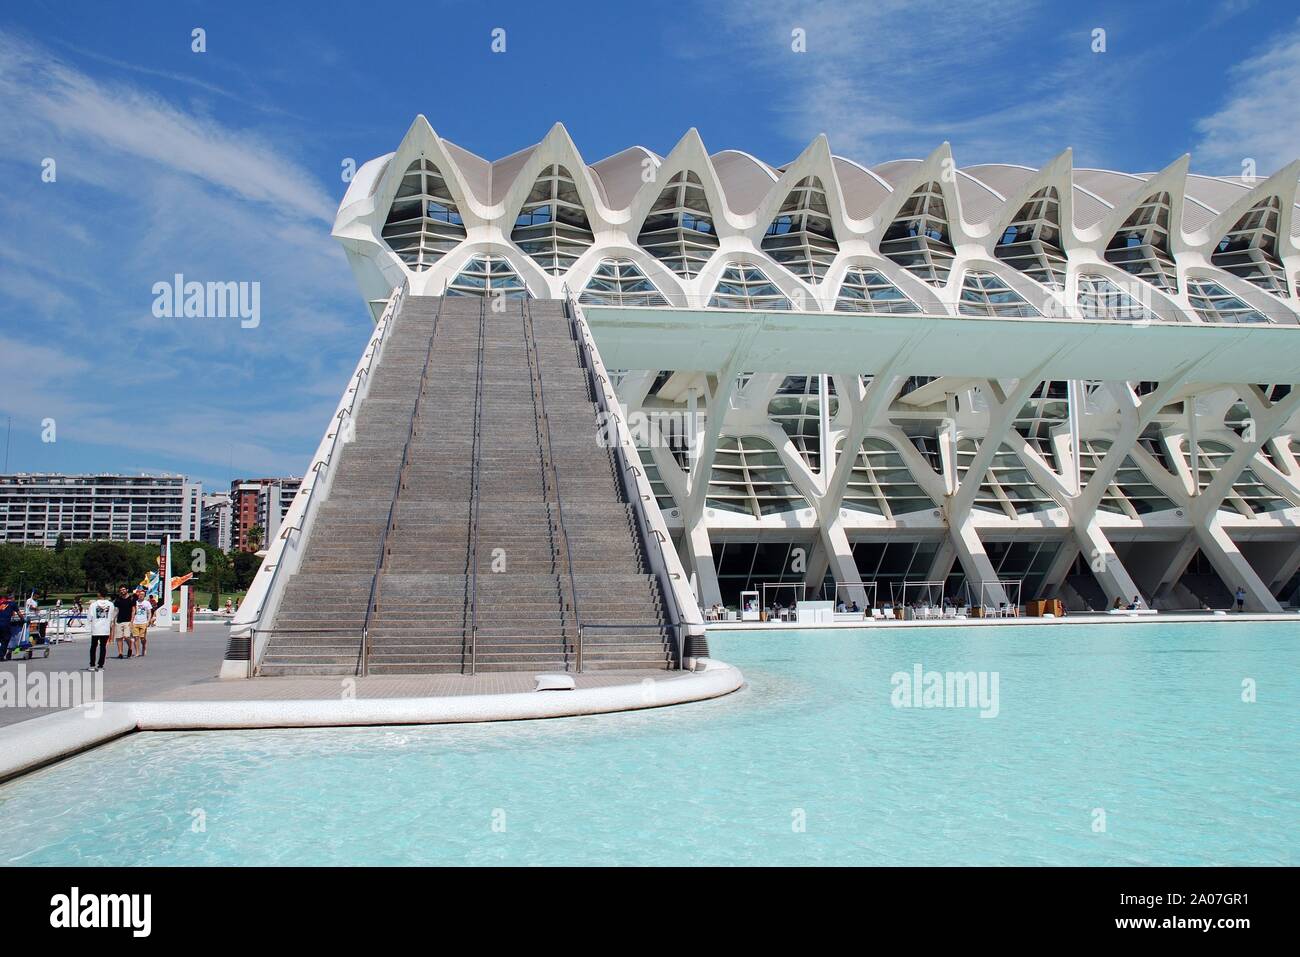 The Museu de les Ciencies at the City of Arts and Sciences in Valencia, Spain on September 5, 2019. Stock Photo